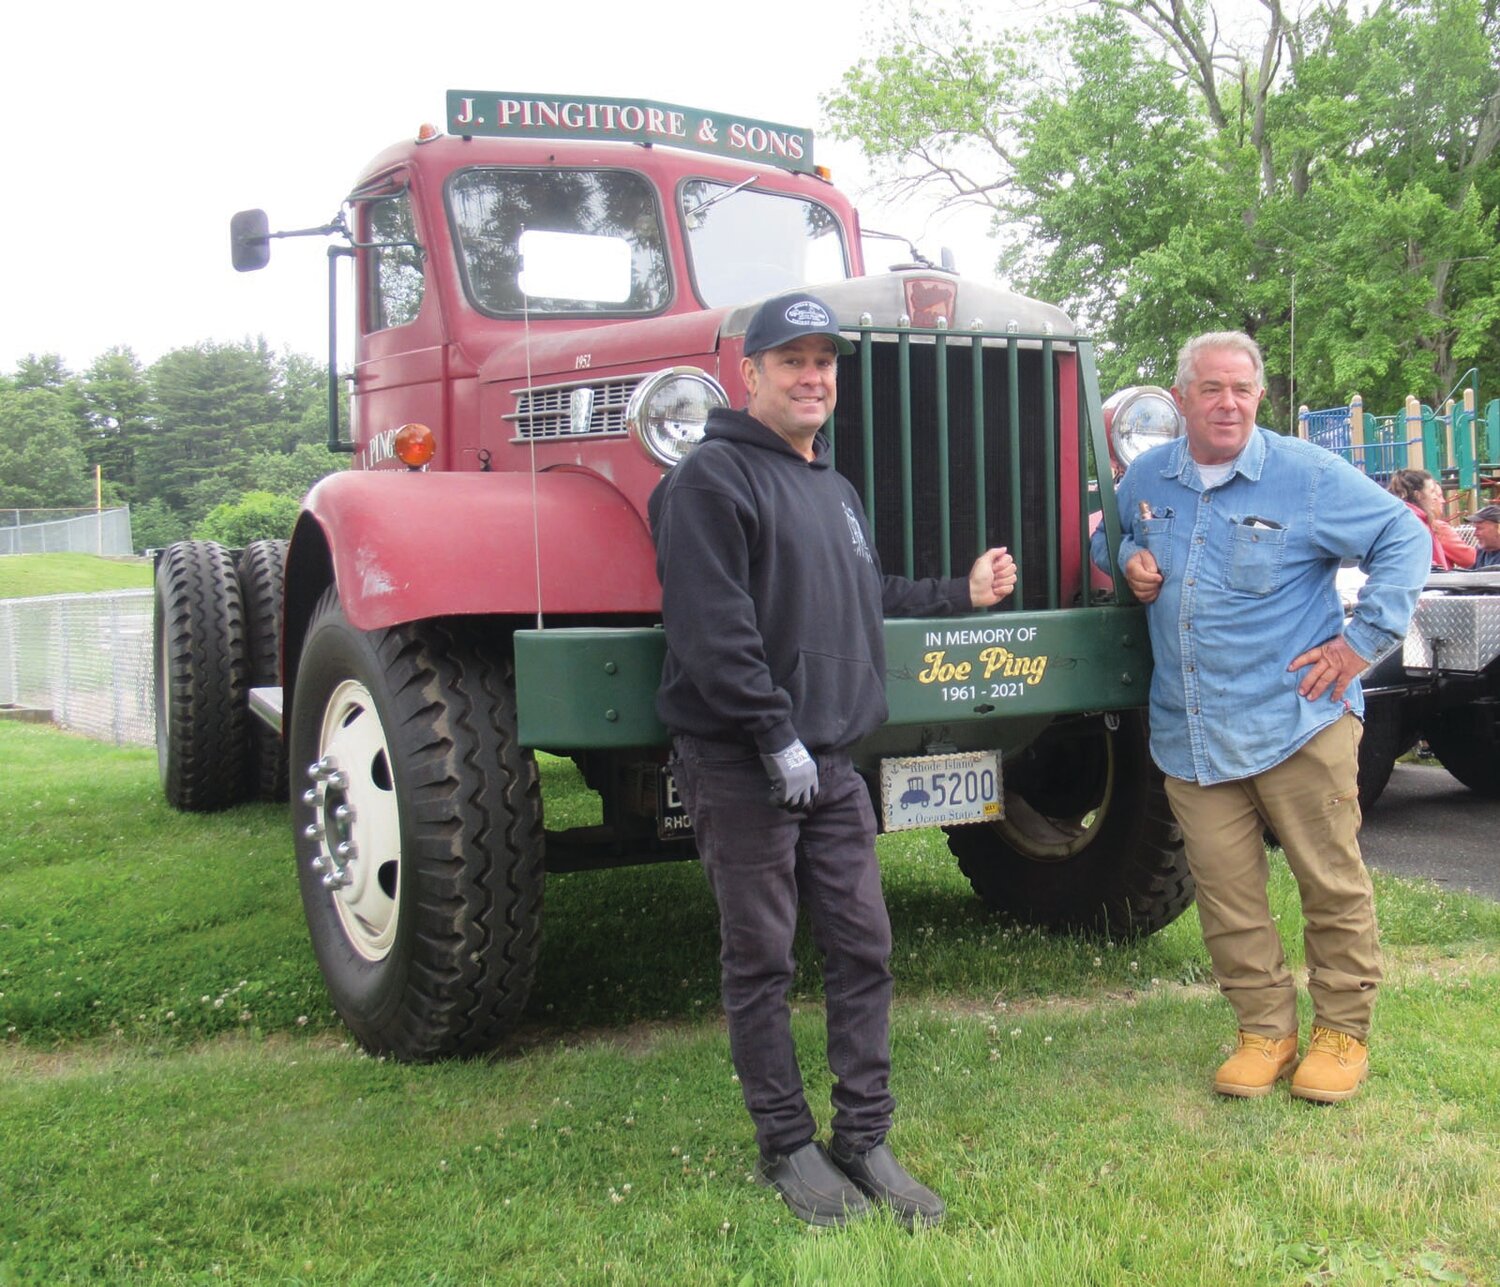 LINKED LEADERS: Ocean State Vintage Haulers Vice President Dave Pingitore (left) and President Ron Rossi stand in front of this 1952 Serling which was owned by the late Joe Pingistore, who for years served as the non-profit’s president.